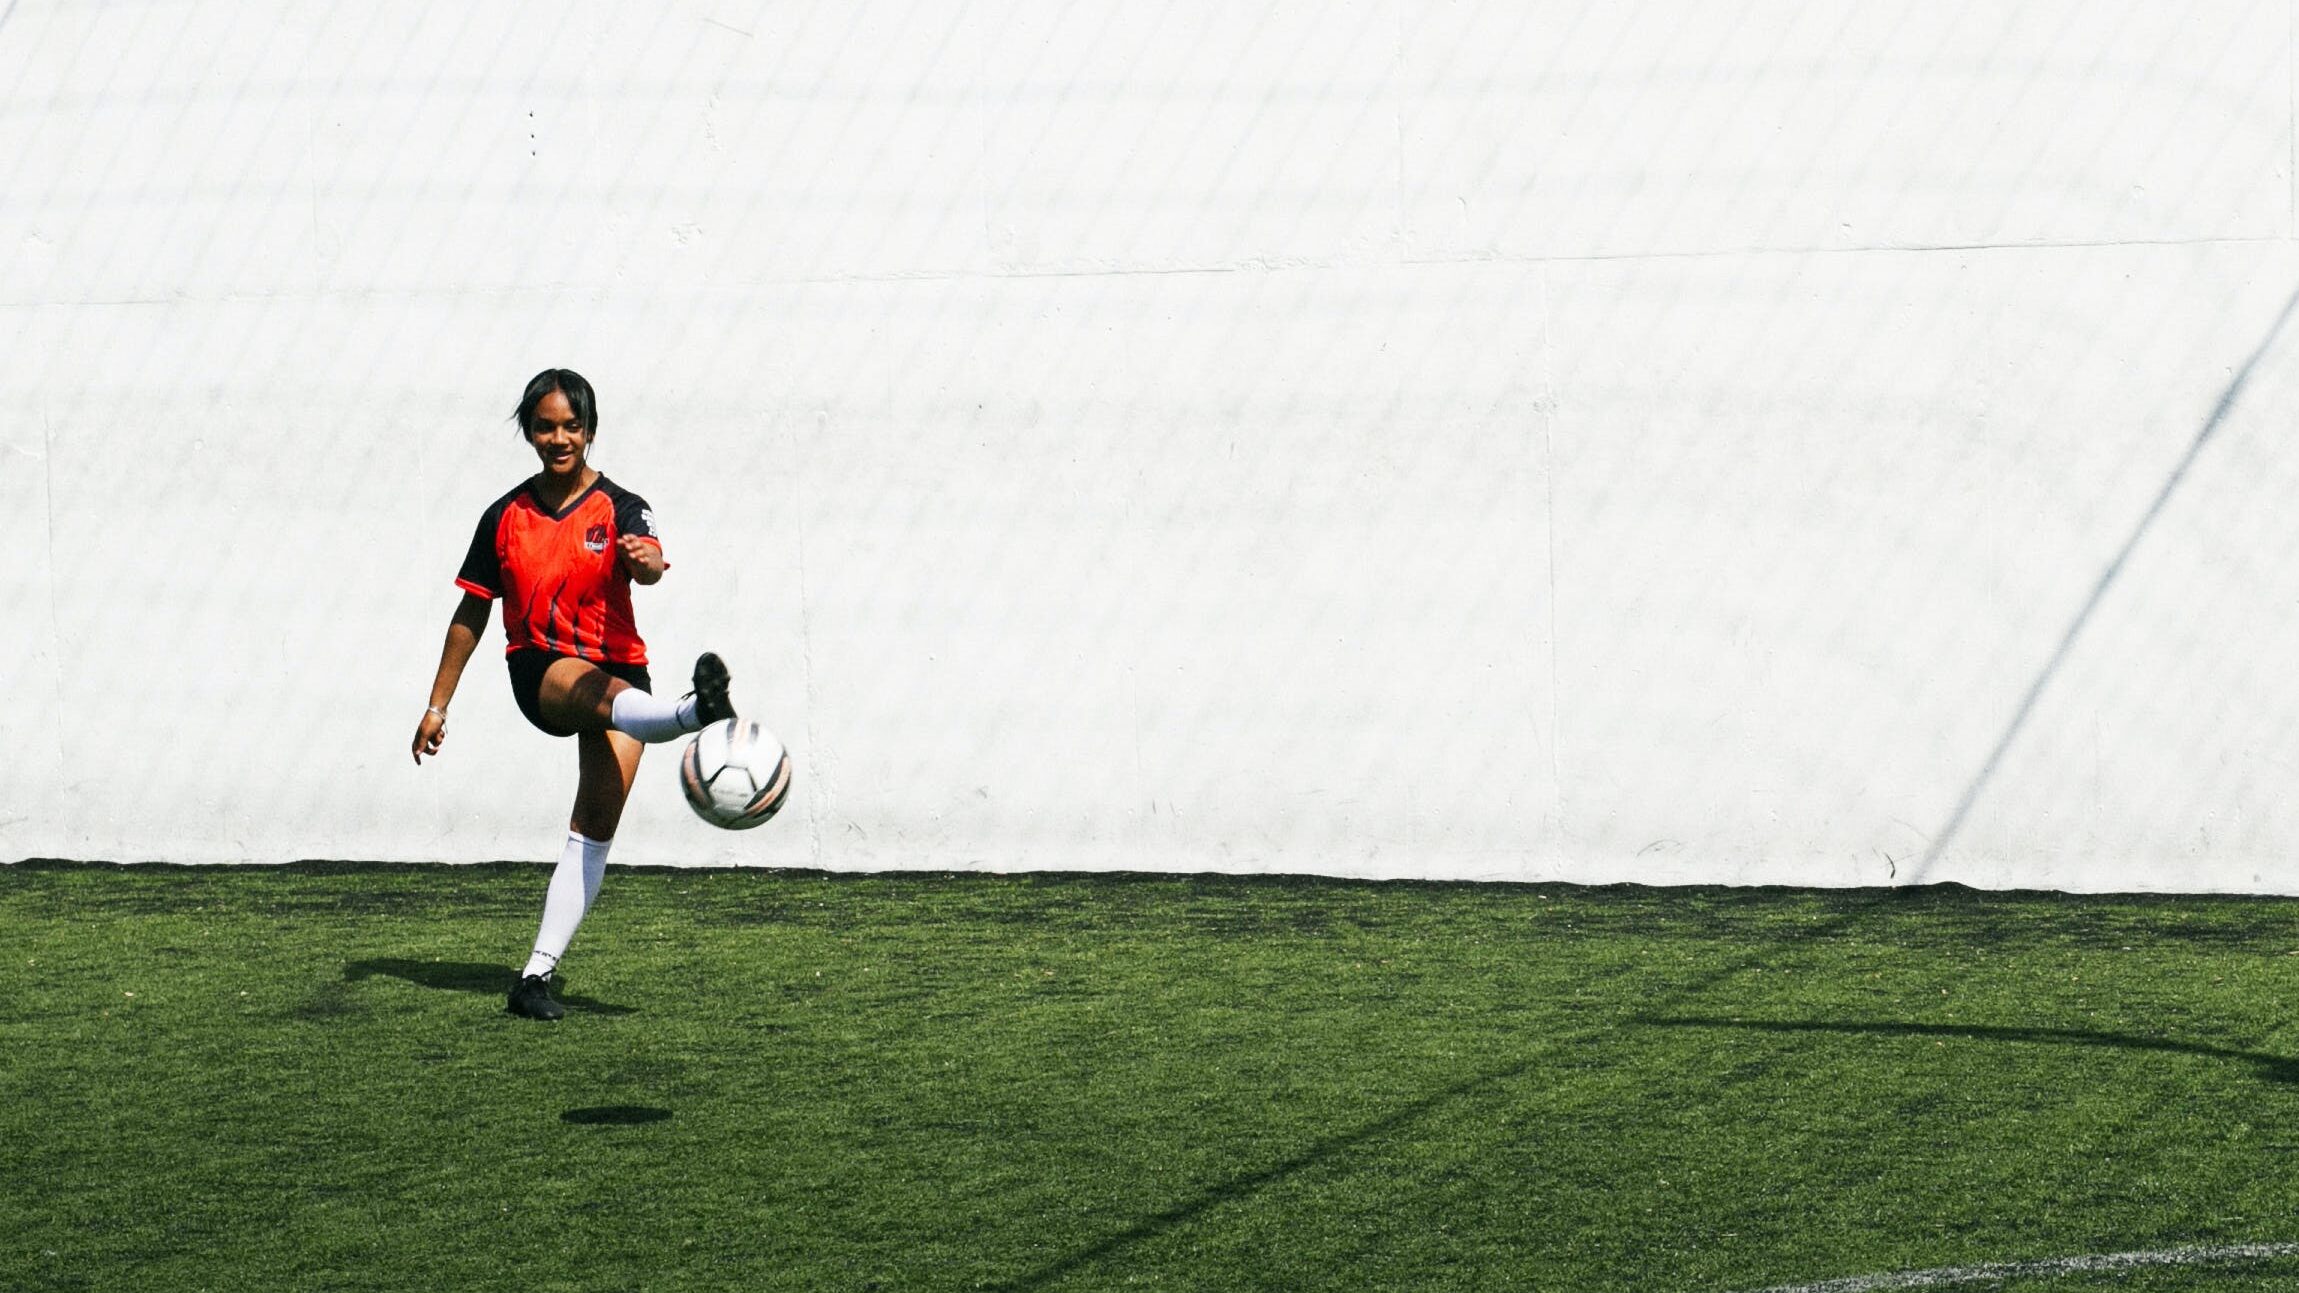 Soccer Basics Before Tricks: 5 Important Skills Every Player Should Know